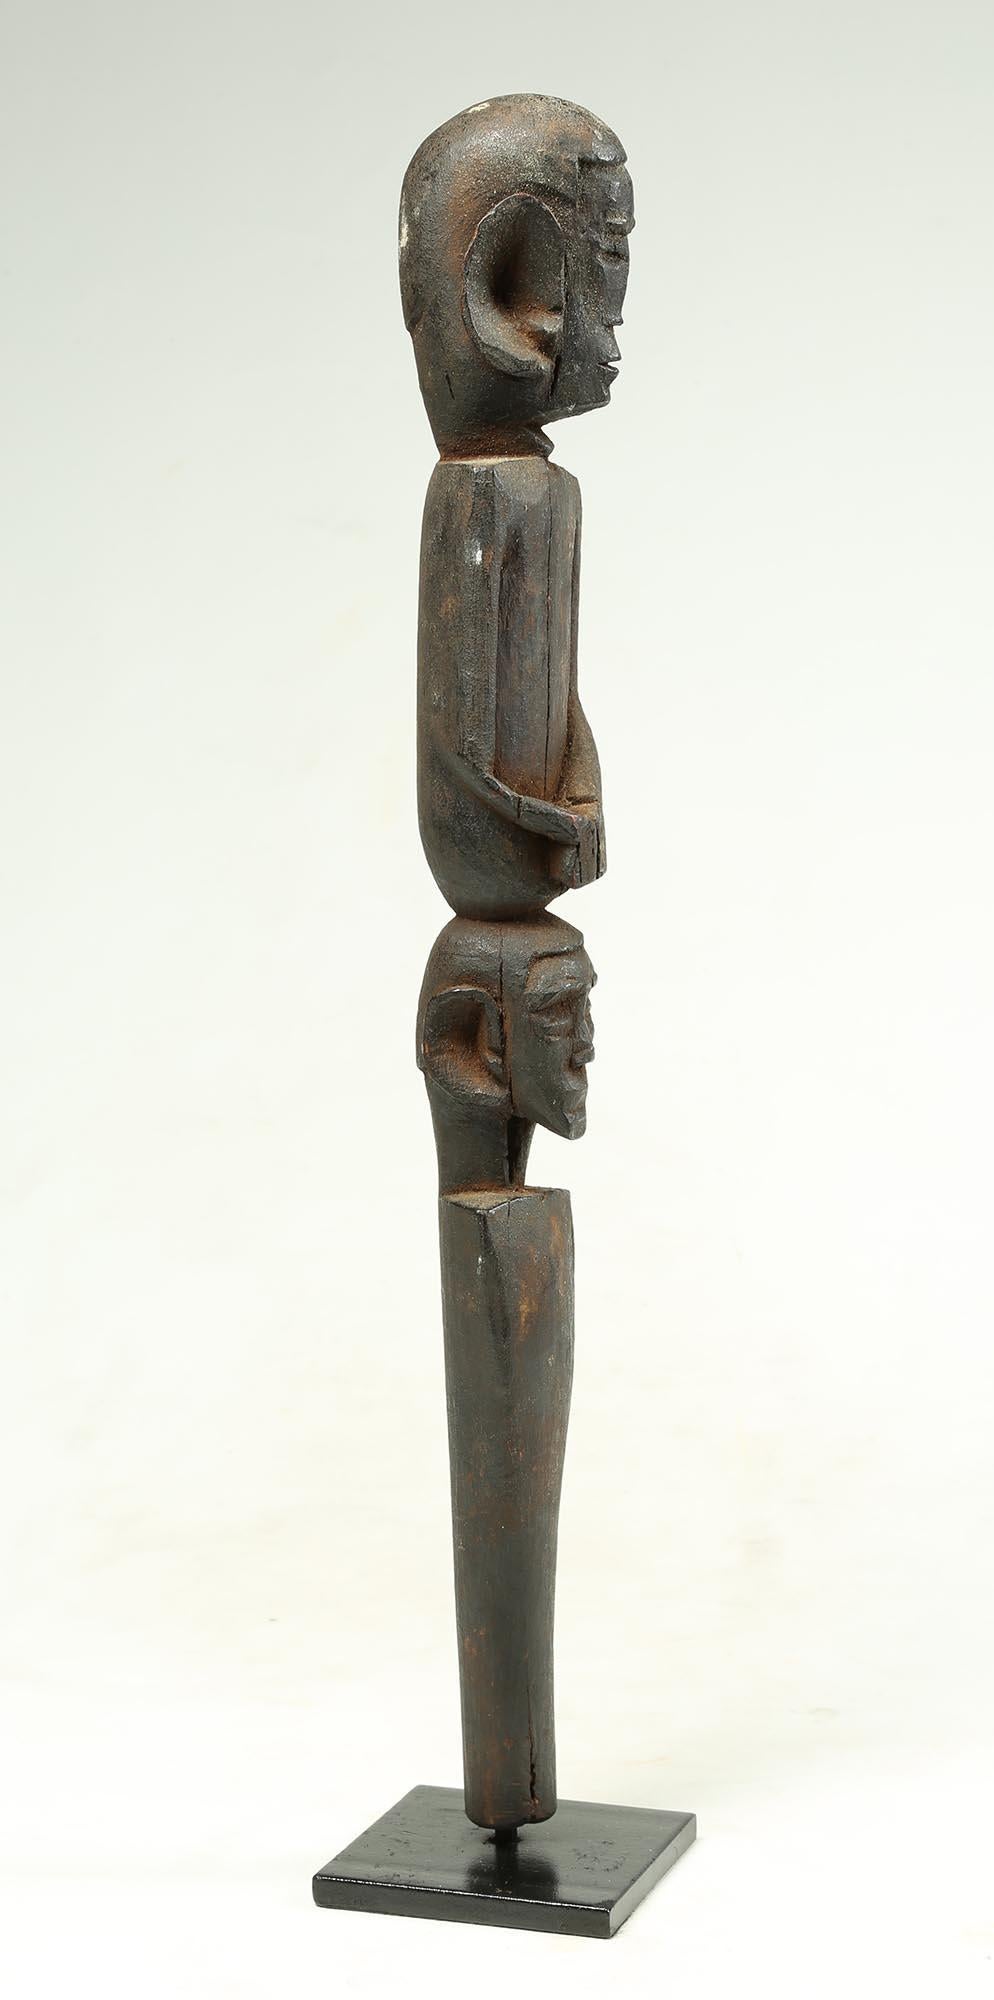 Wood East African Double Zigua Figure with Large Ears, Early 20th Century, Tanzania